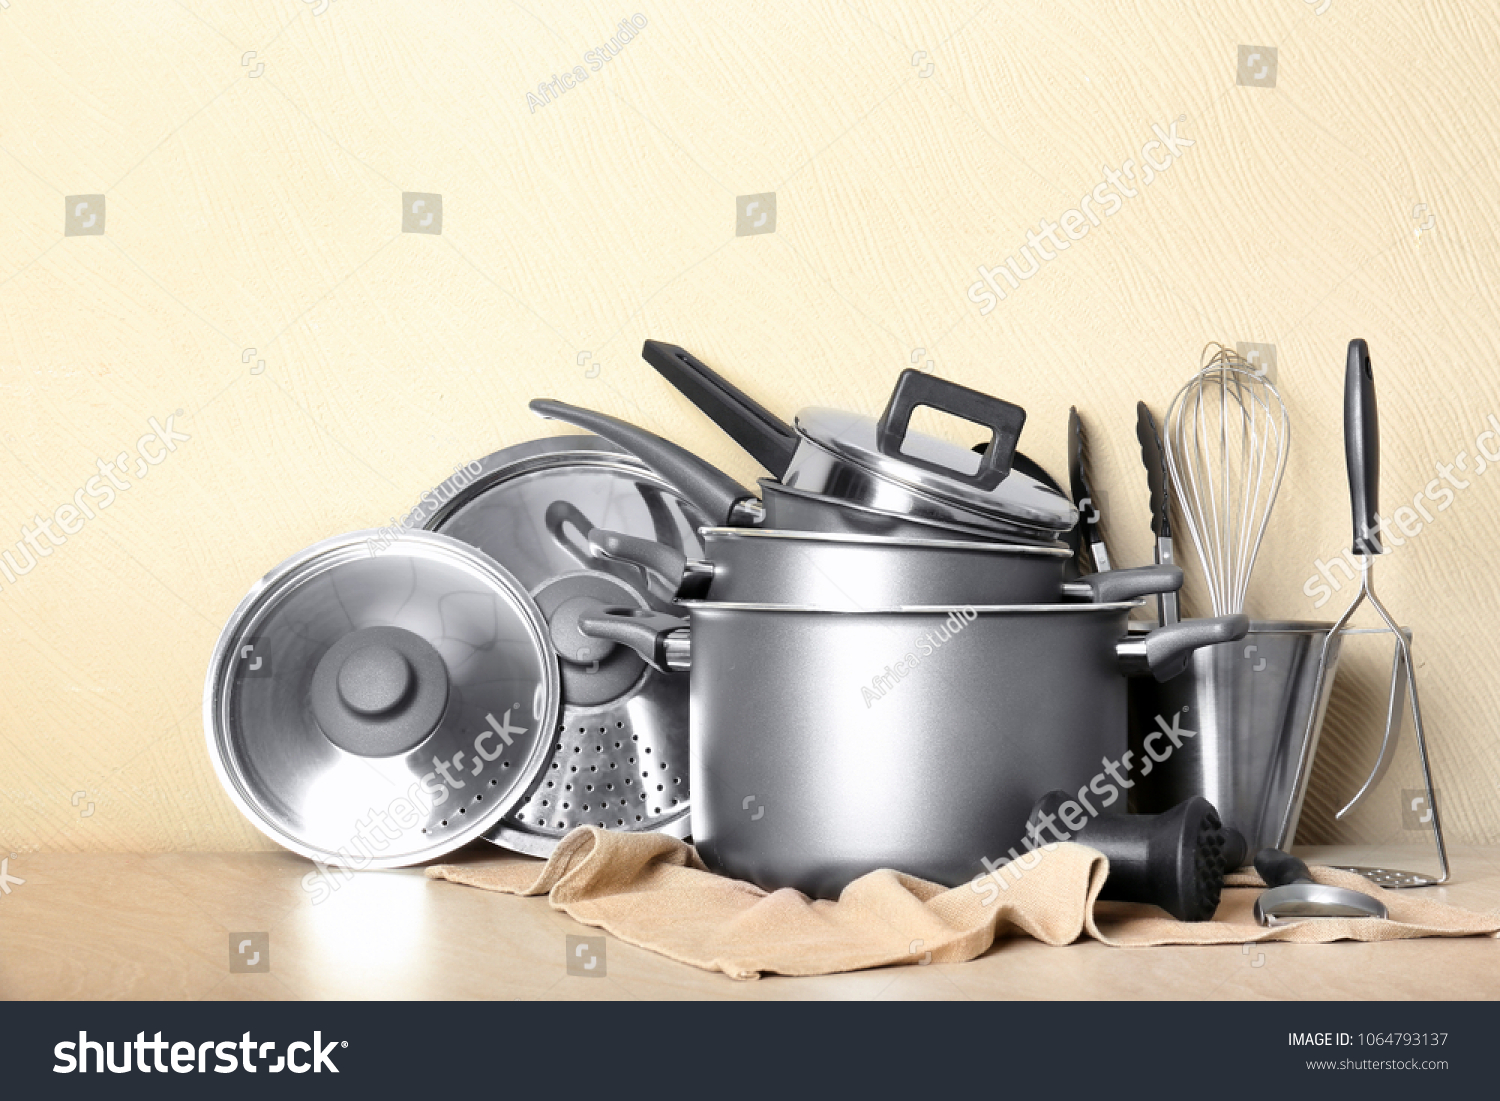 Kitchenware prepared for cooking classes on table against light wall #1064793137